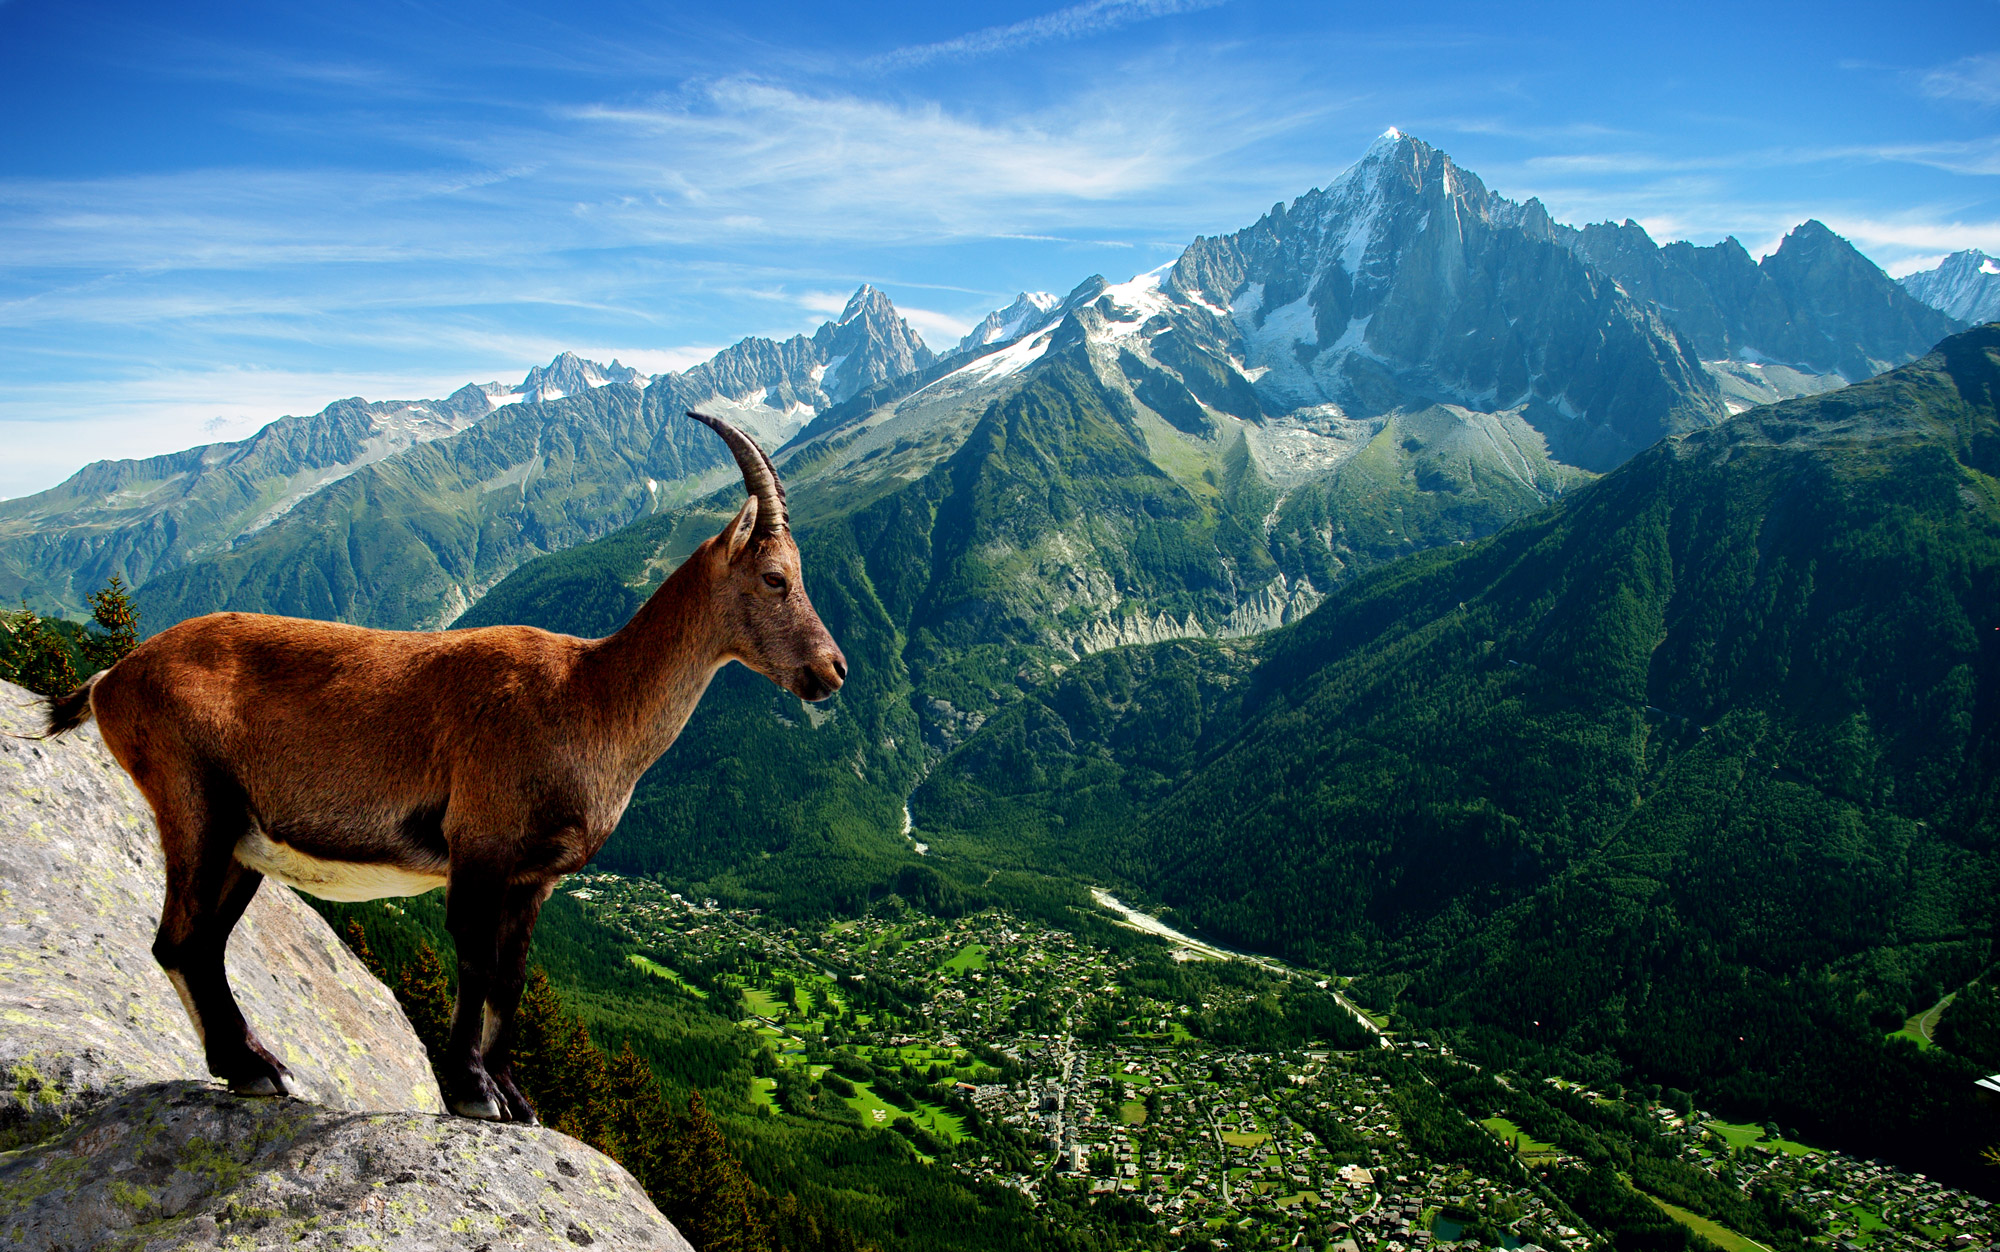 Goat pictured in an alpine landscape